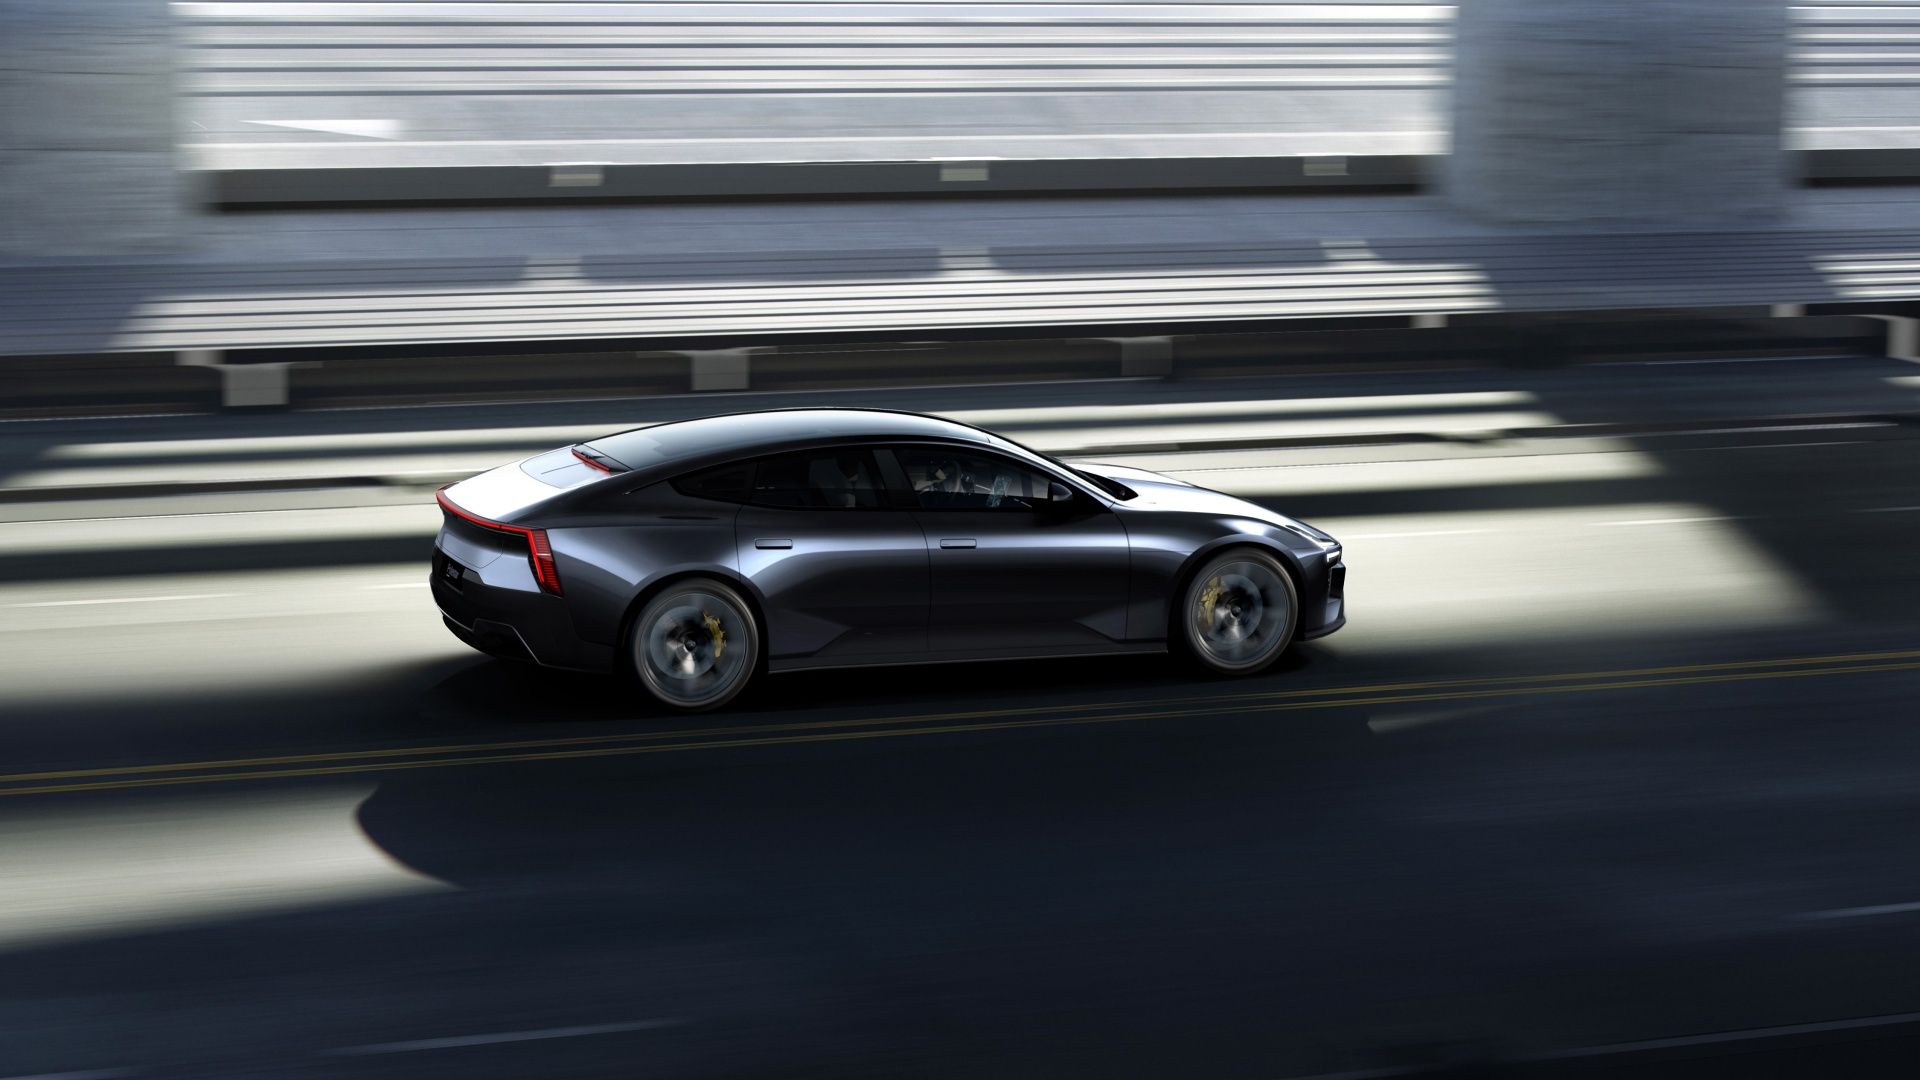 An action shot of the Polestar 5 driving on the street